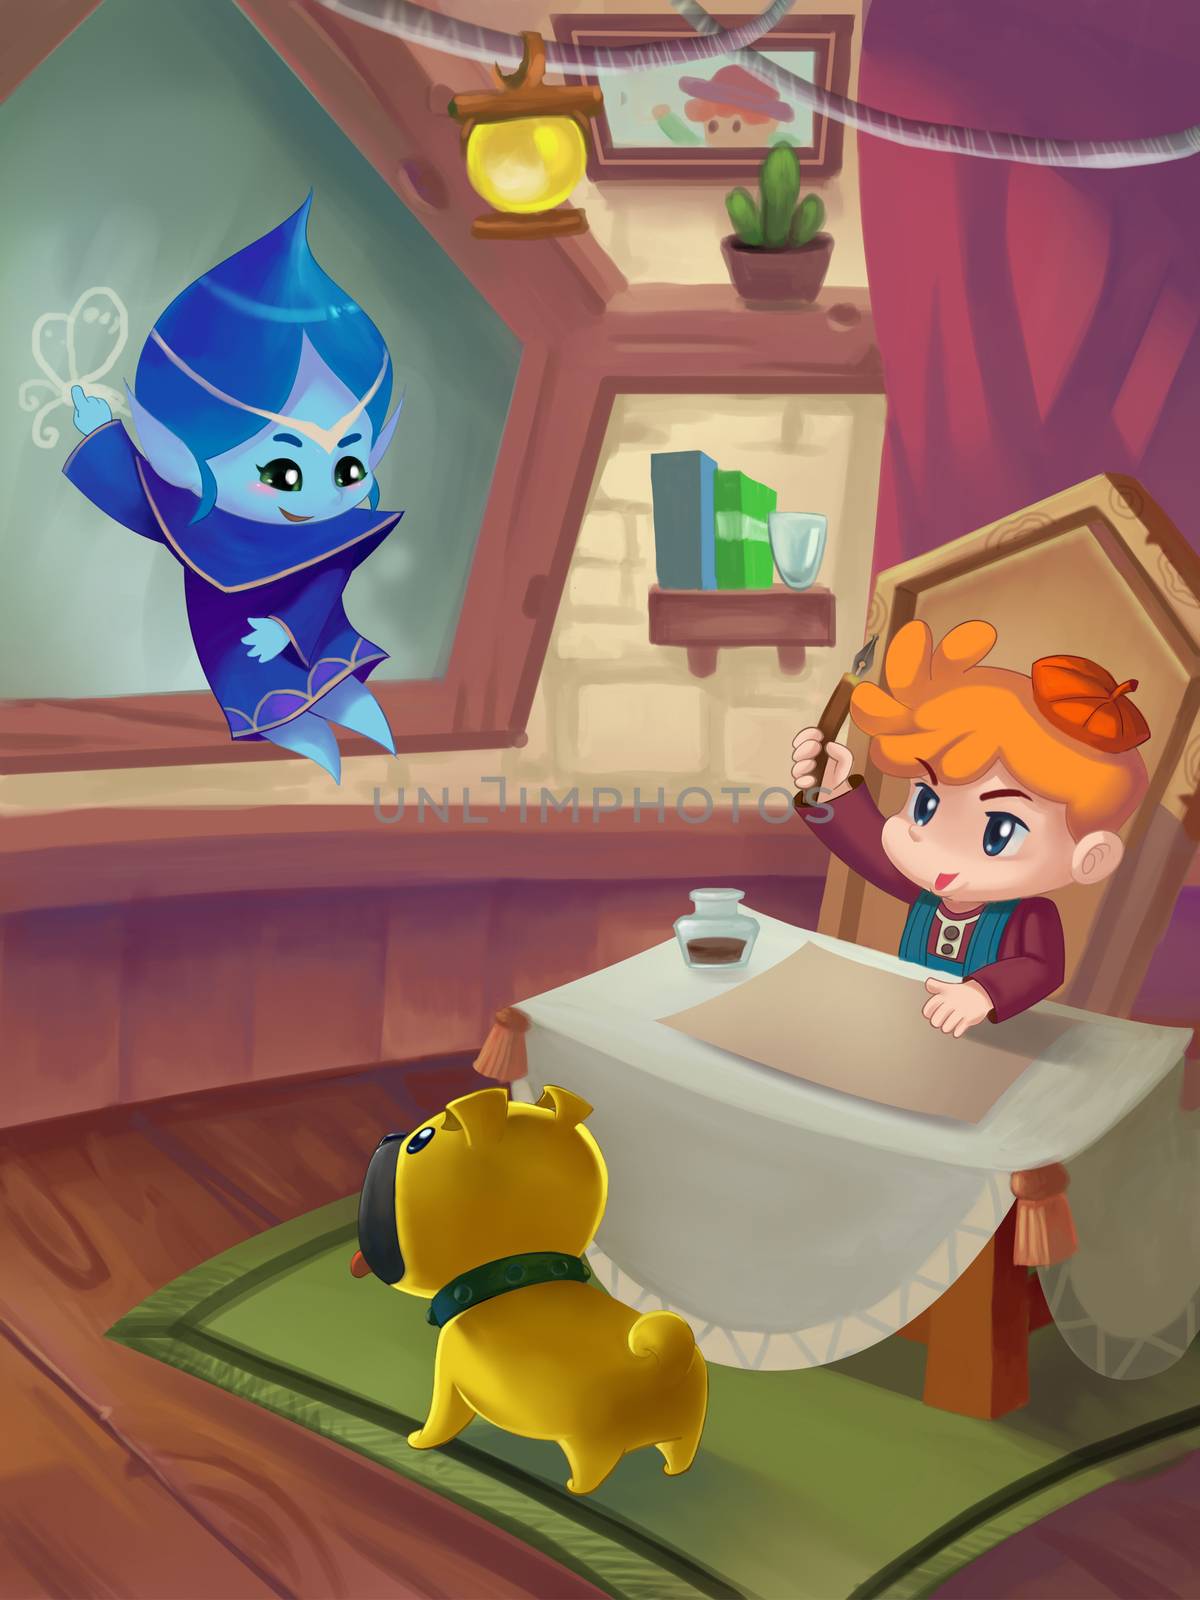 Illustration: Let me teach you. The ice girl, the boy and his dog in the study room. Fantastic Cartoon Style Scene Wallpaper Background Design.